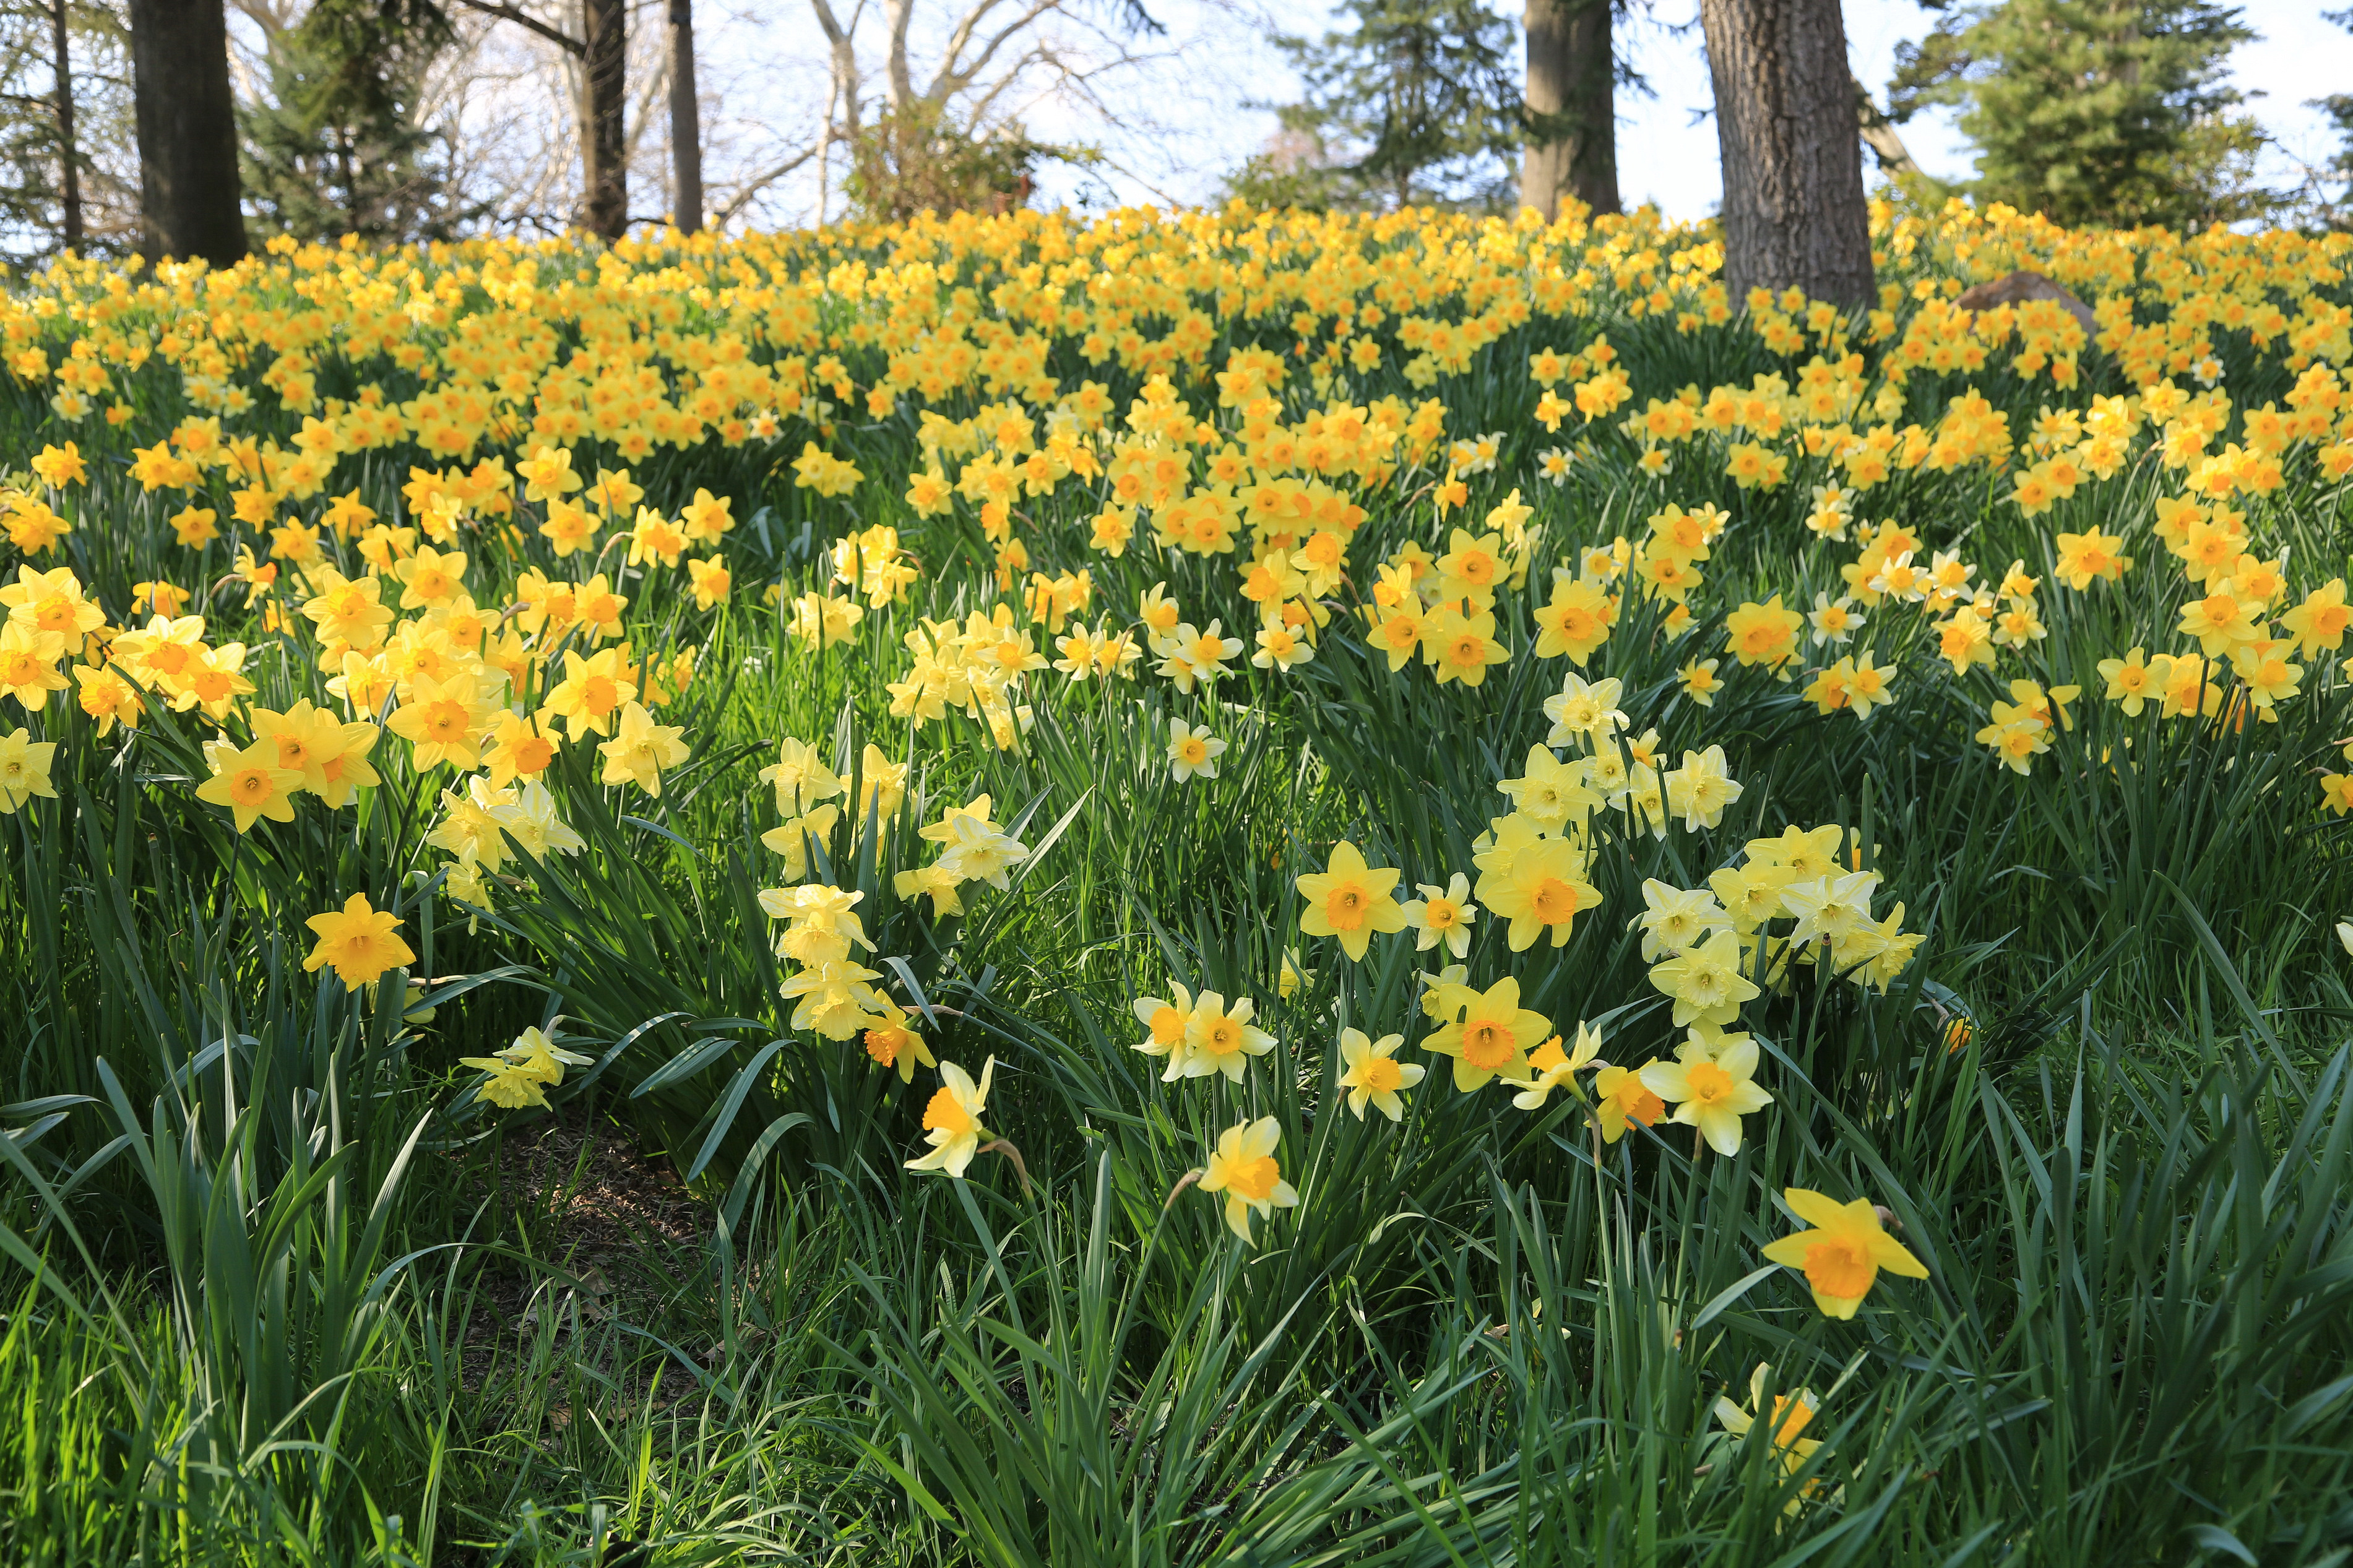 earth, daffodil, field, flower, grass, narcissus, yellow flower, flowers